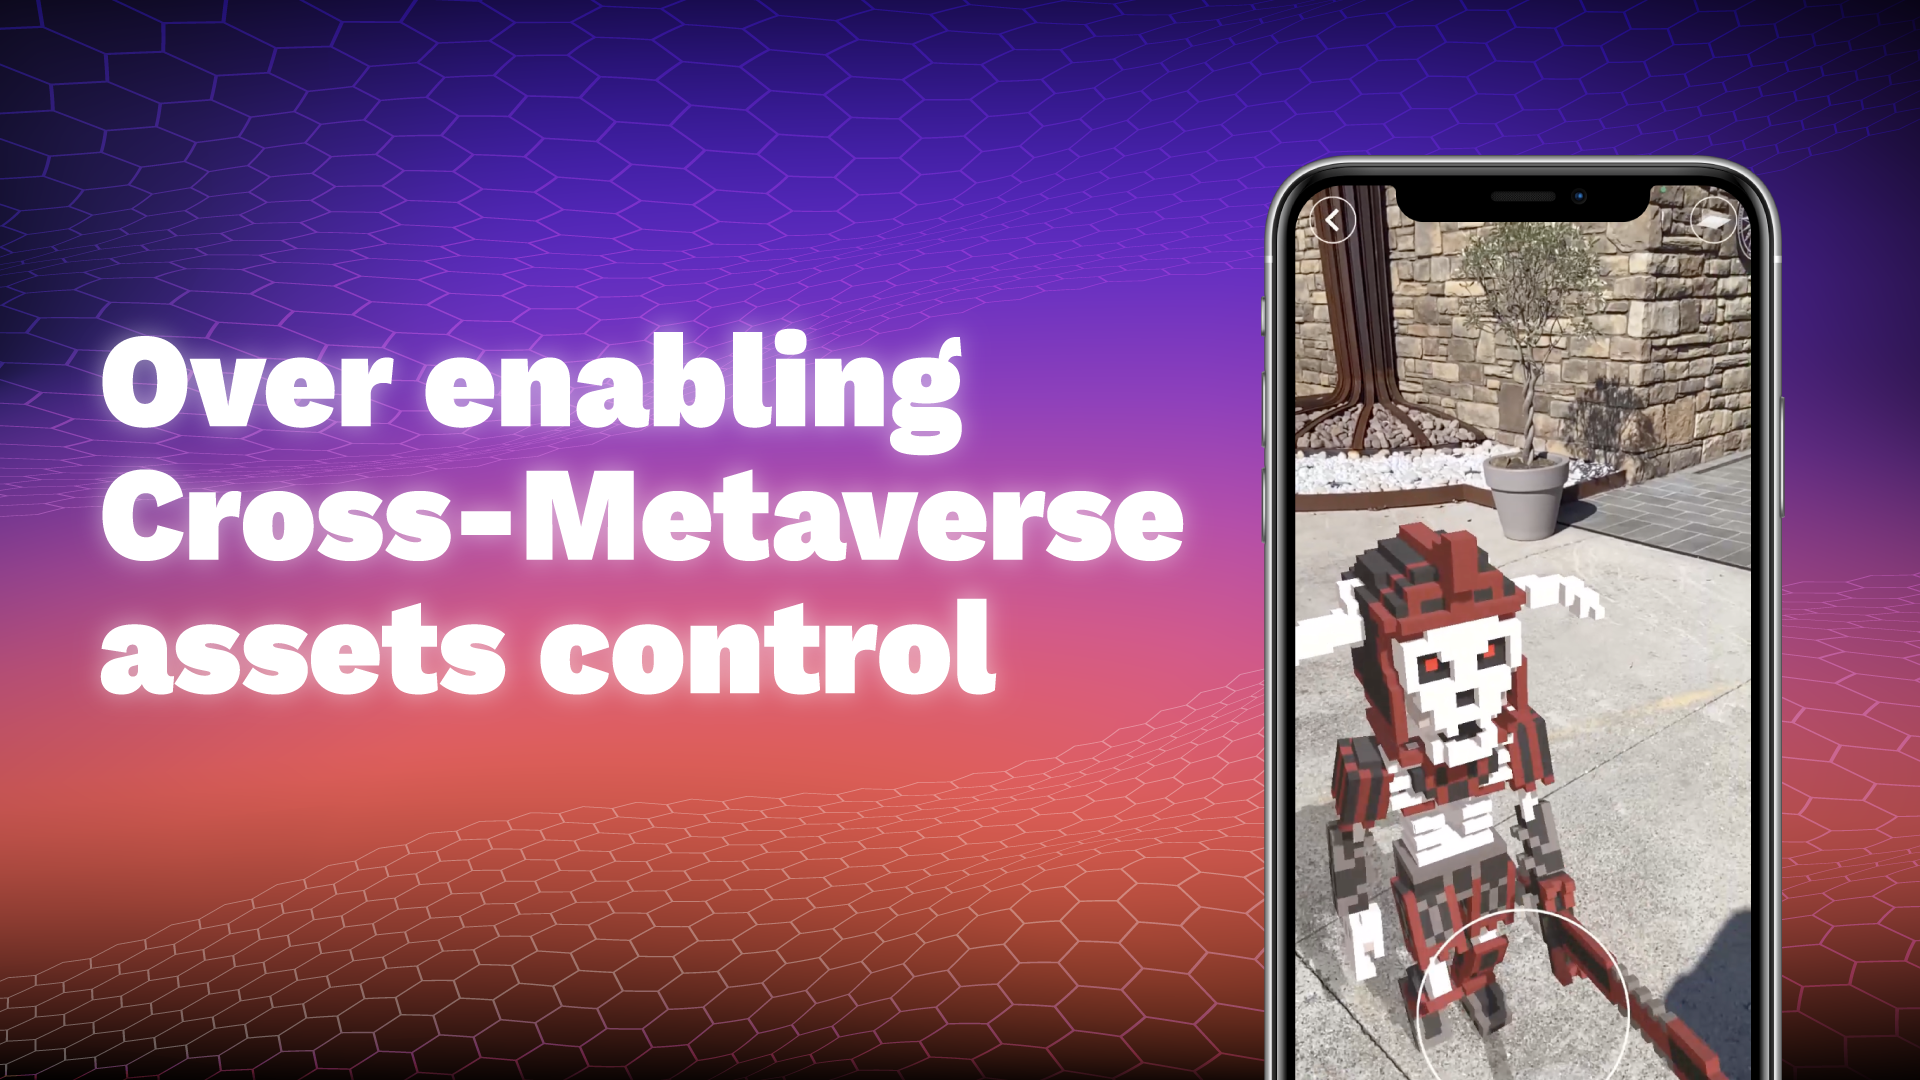 OVER enabling Cross-Metaverse assets control